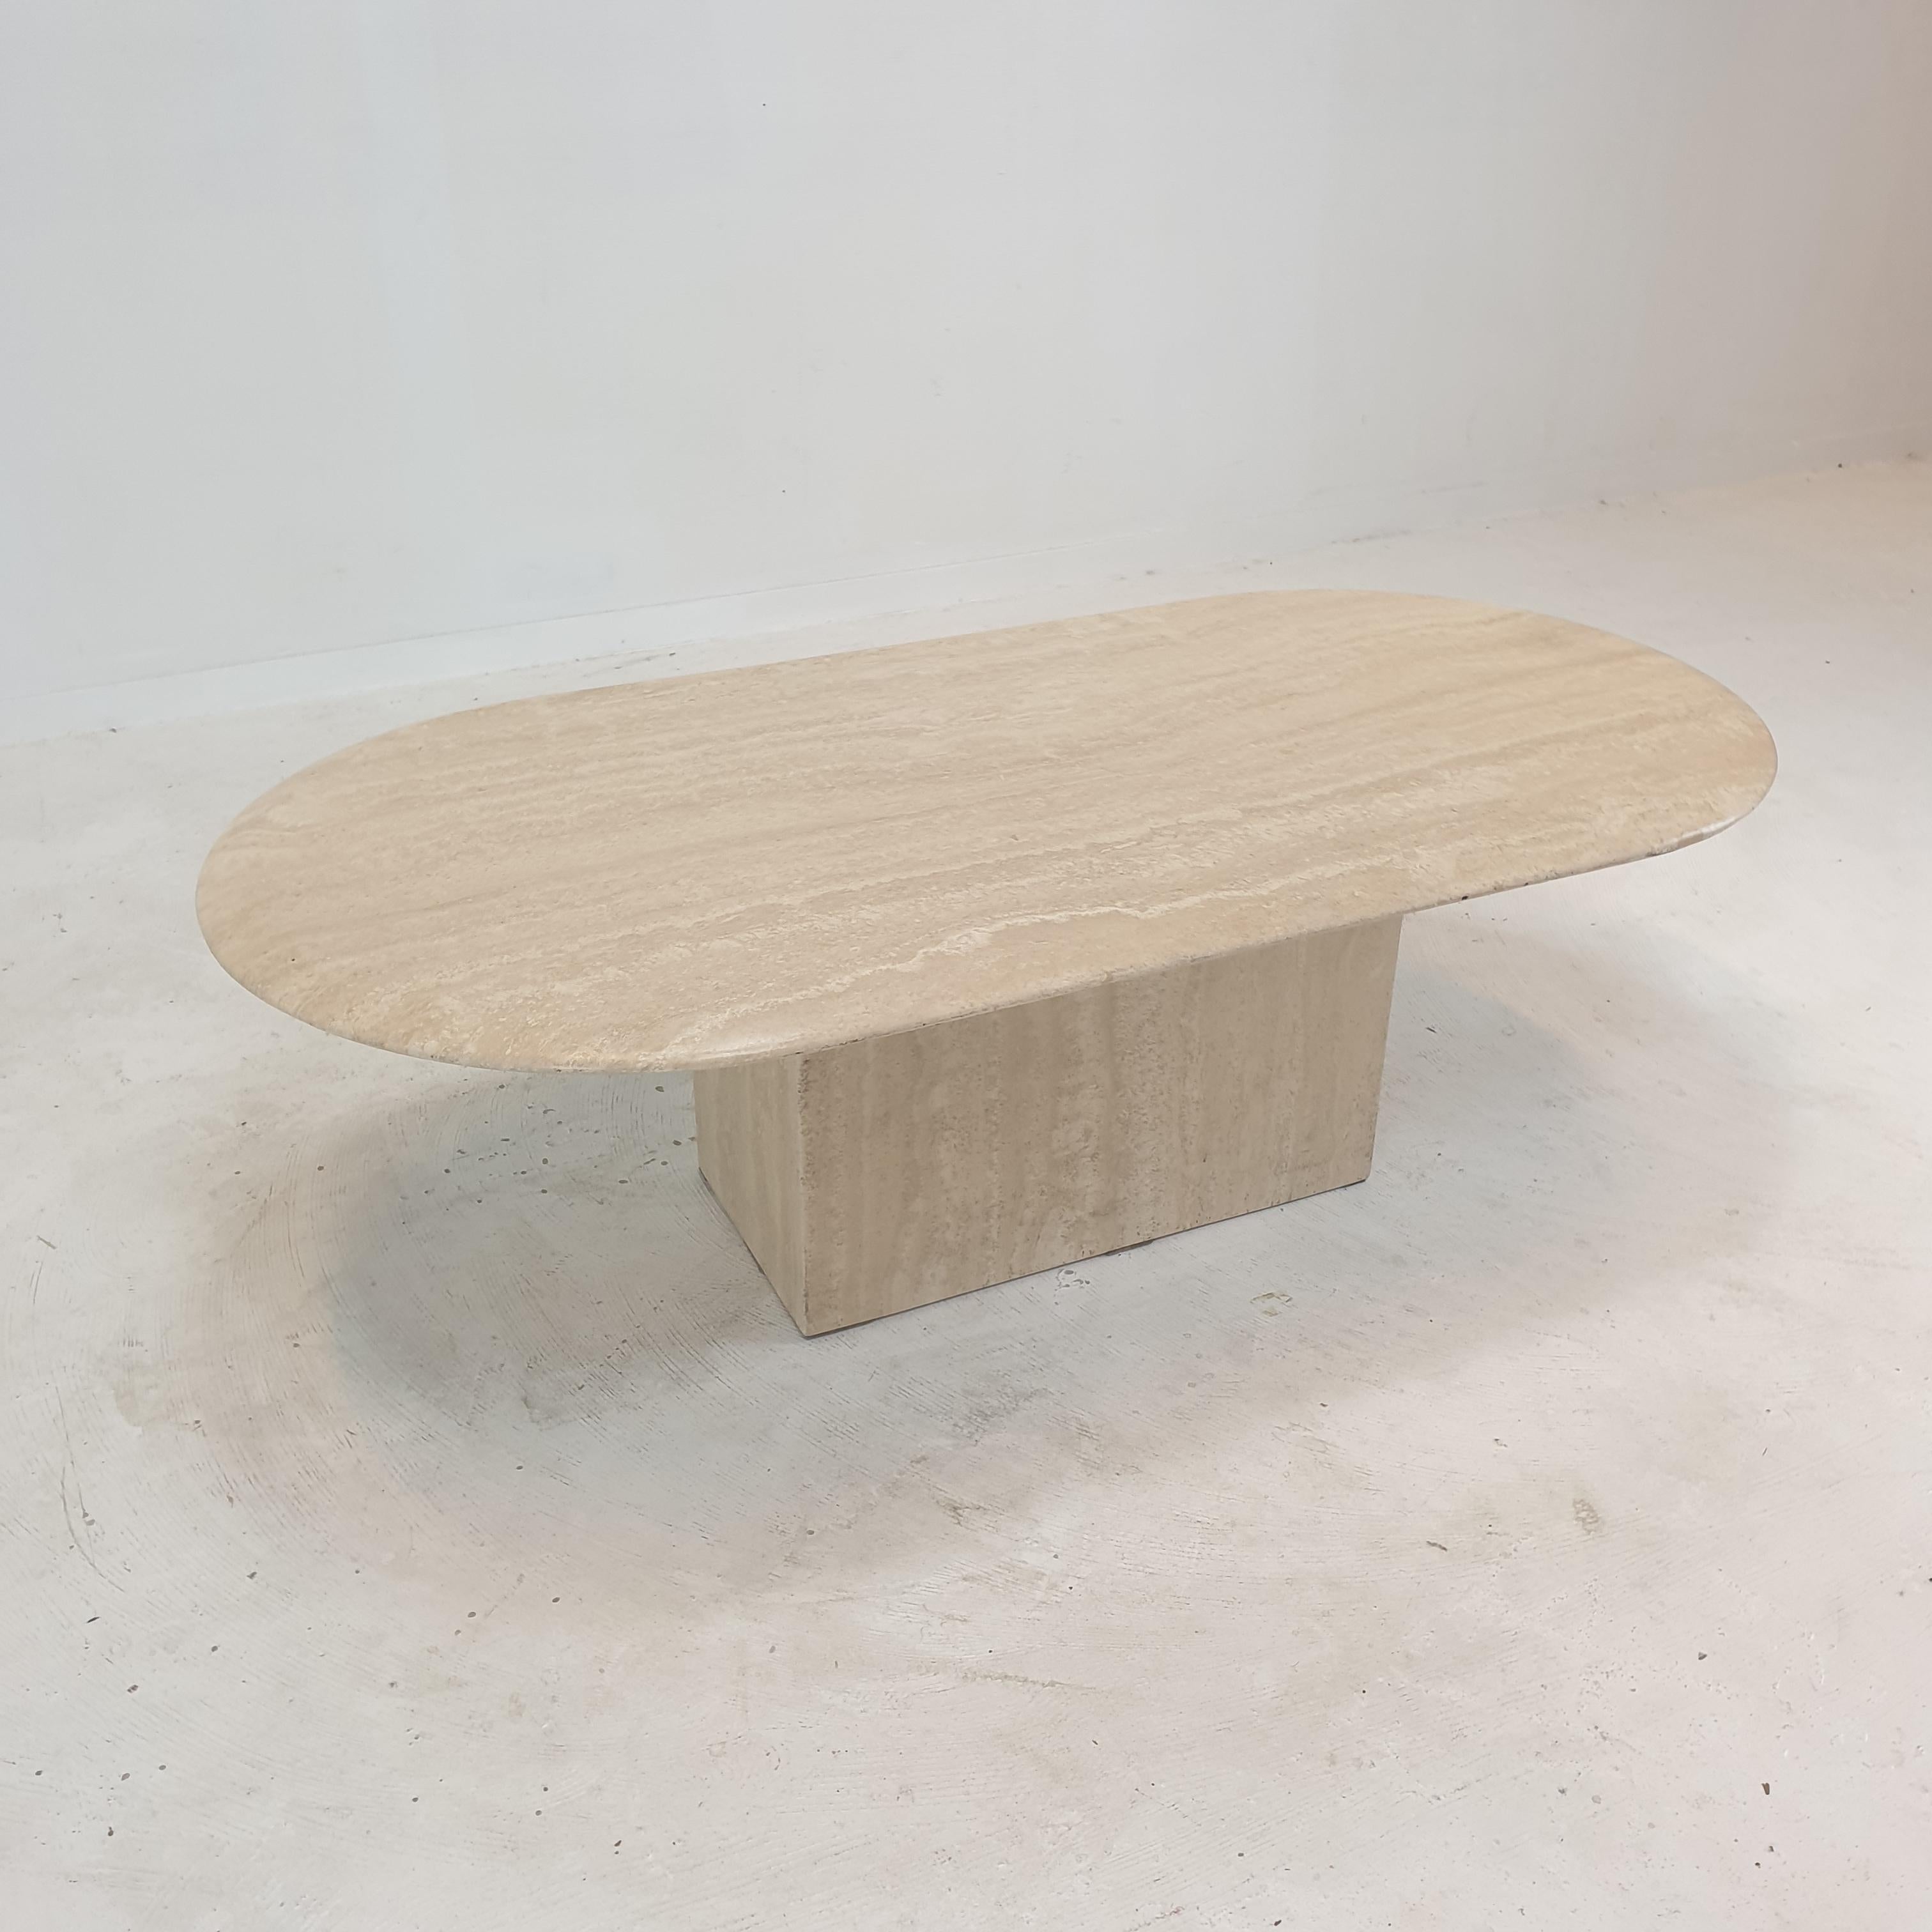 Italian Oval Coffee Table in Travertine, 1980s For Sale 2